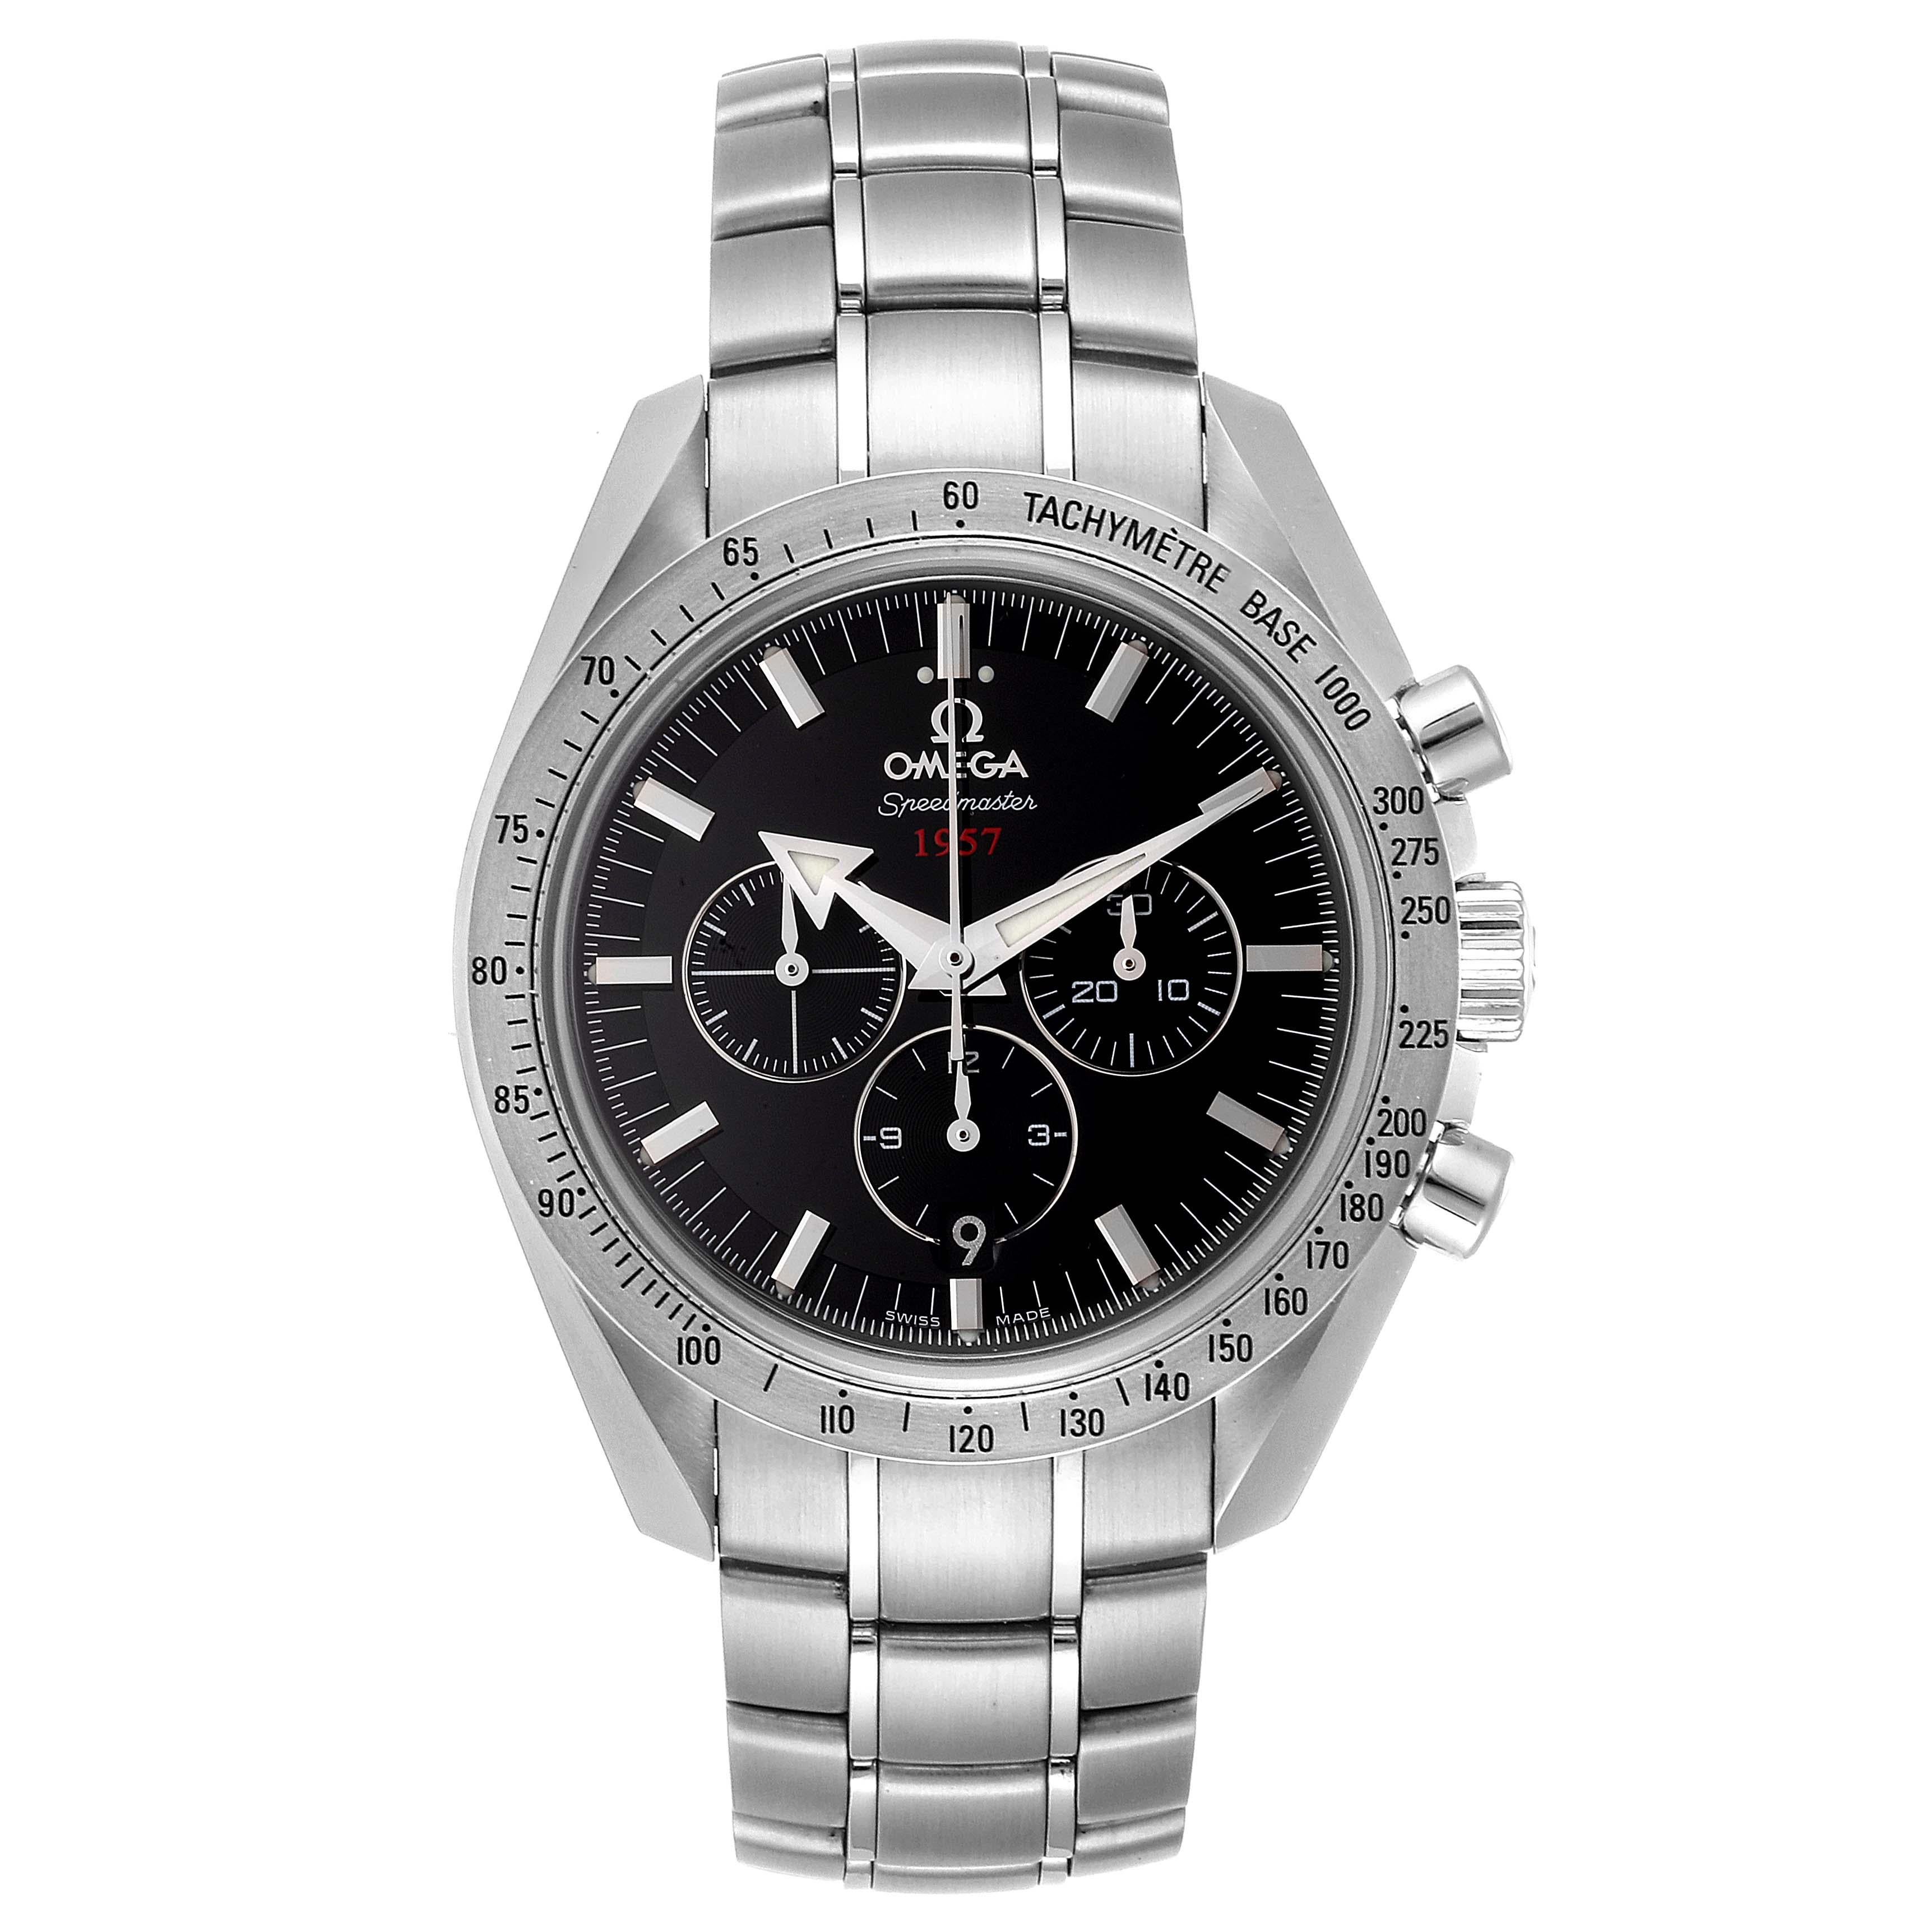 Omega Speedmaster Broad Arrow 1957 Watch 321.10.42.50.01.001 Box Card. Automatic self-winding chronograph movement with column wheel mechanism and Co-Axial Escapement. Stainless steel round case 42.0 mm in diameter. Stainless steel bezel with